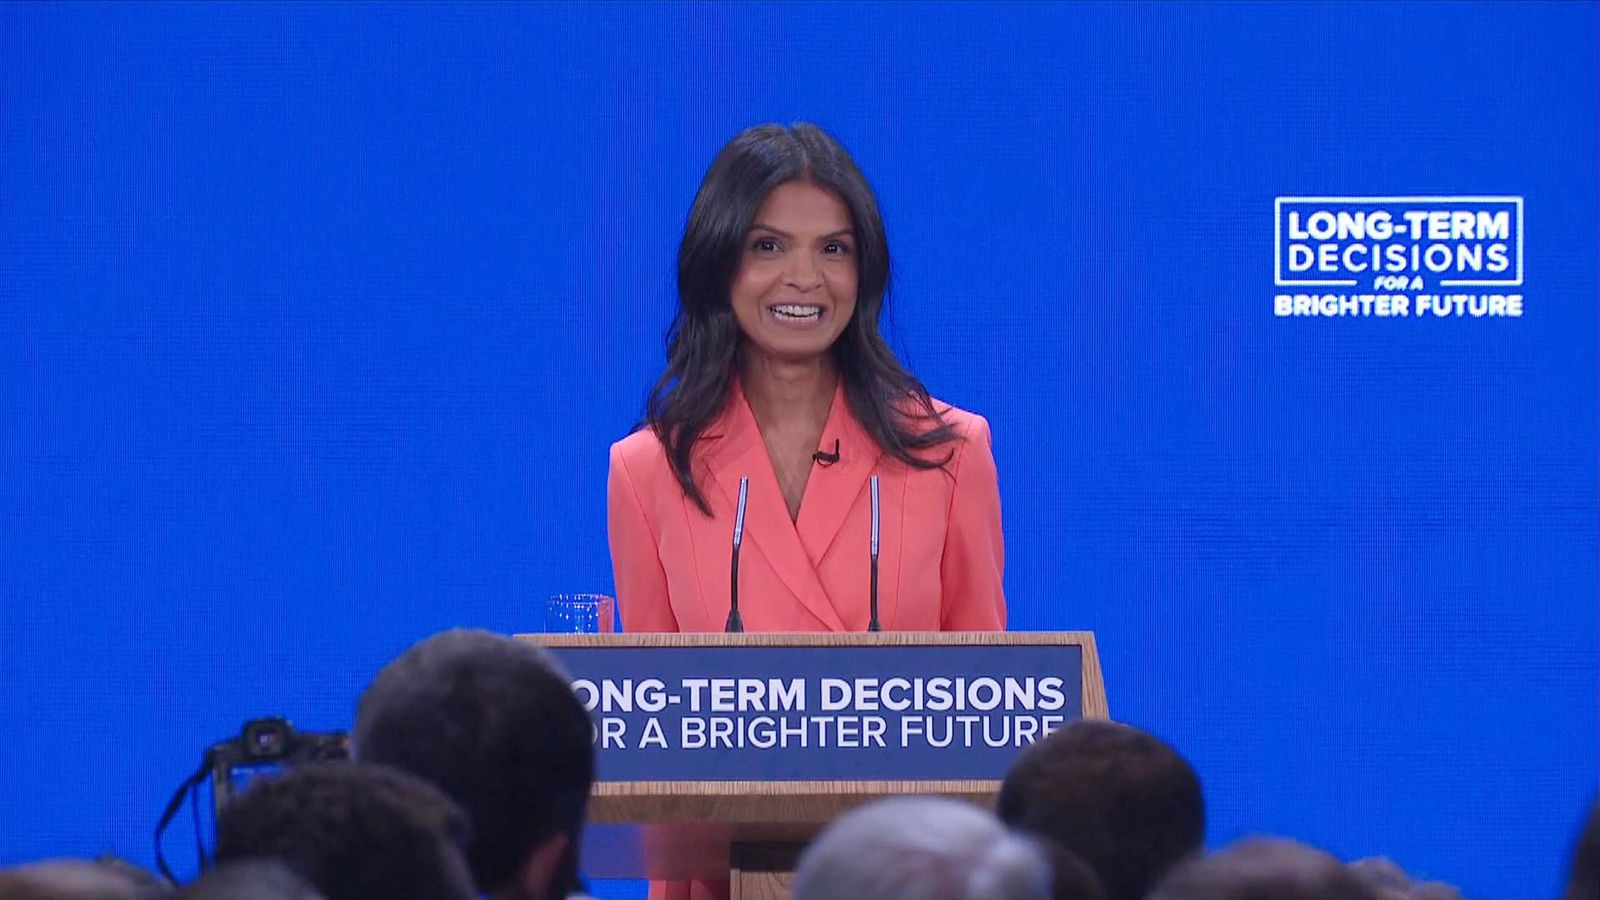 Akshata Murty's speech at Tory conference was a bold move that humanised Rishi Sunak